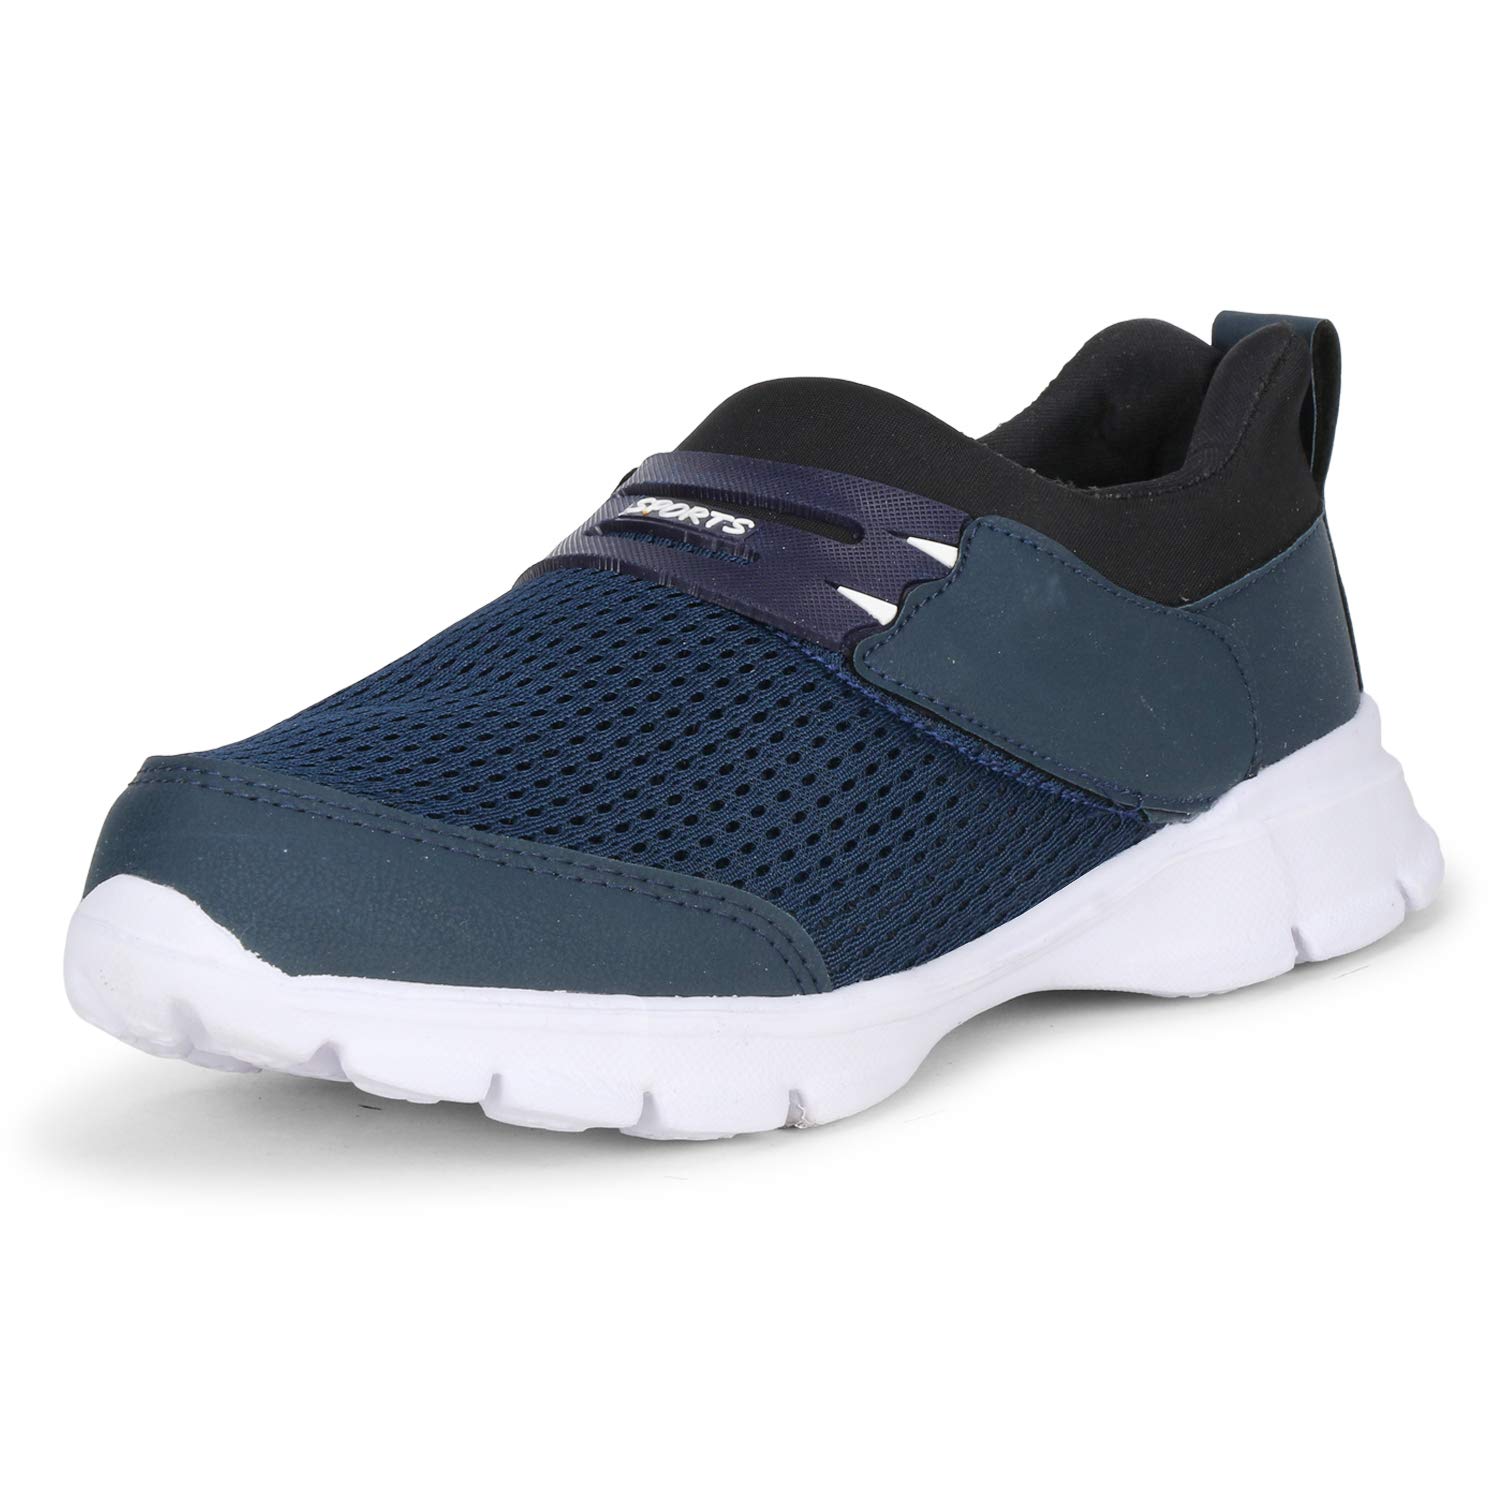 Acteo Men's Shoes Upto 80% Discount Starting From Rs.259